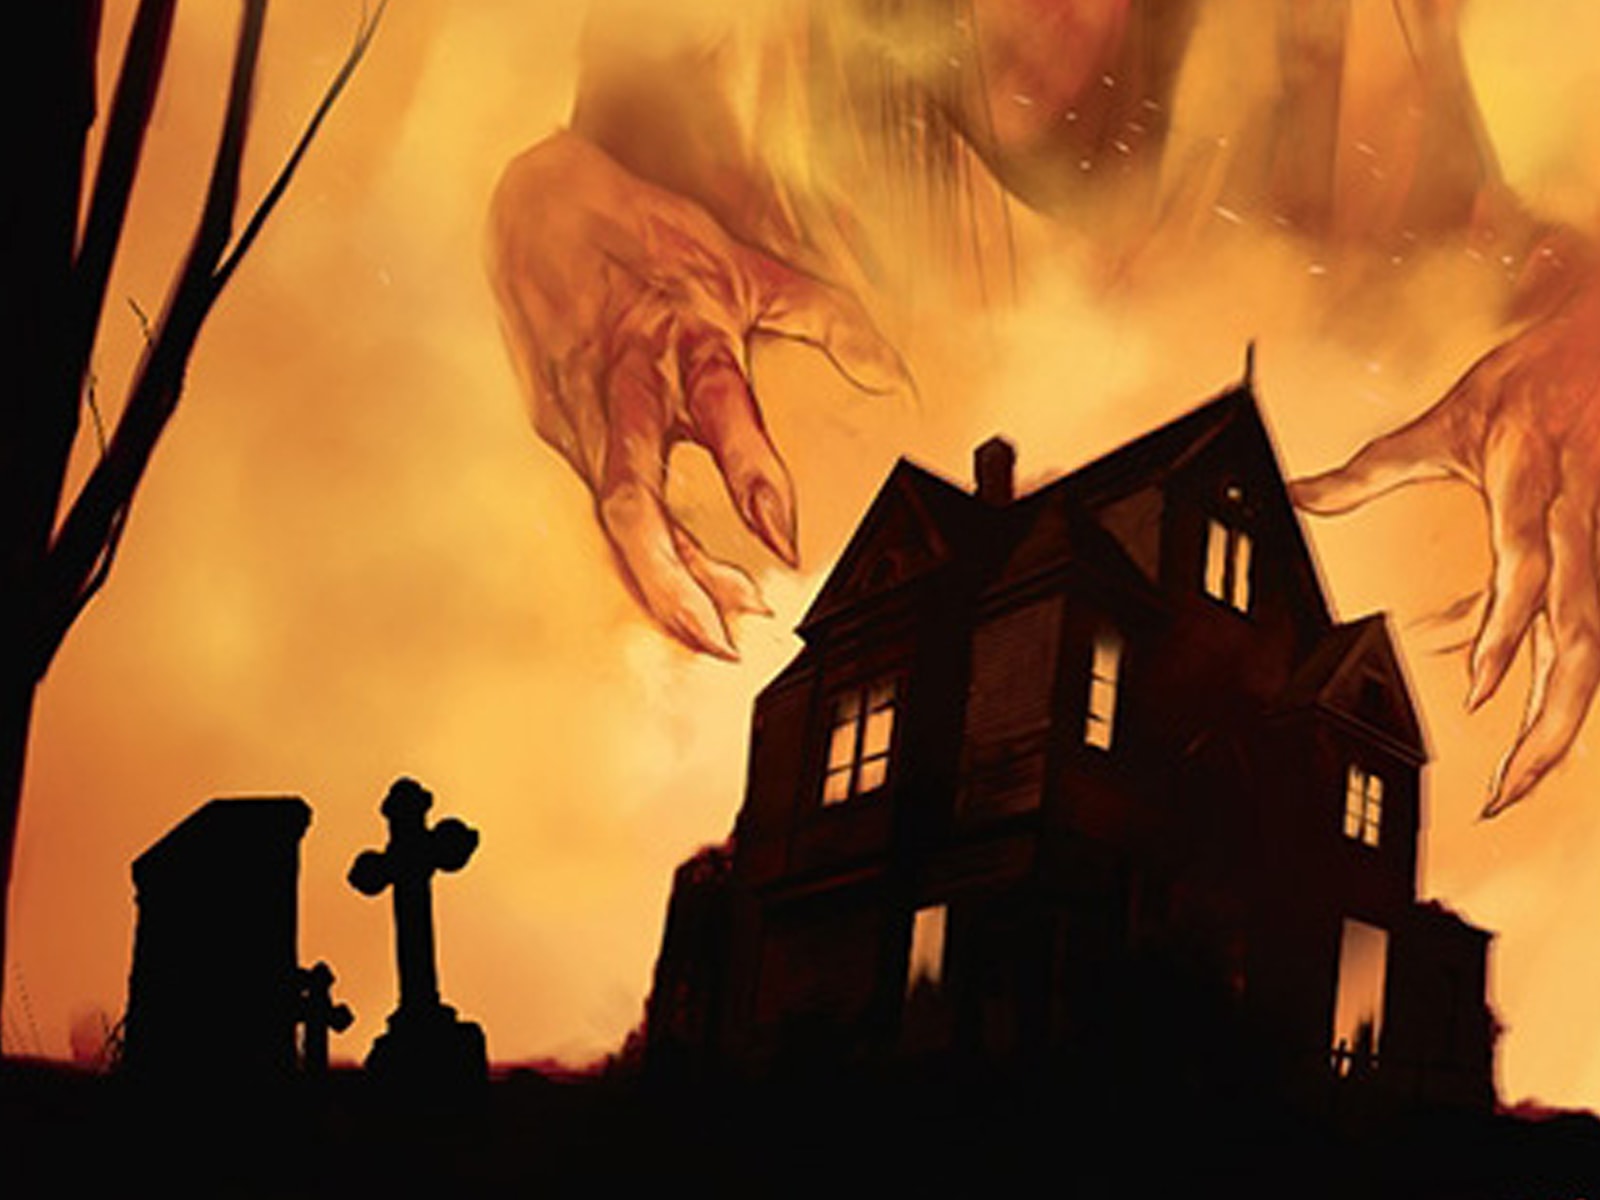 Illustration of a spooky house and giant claw-like hands featured on the box of Betrayal at House on the Hill